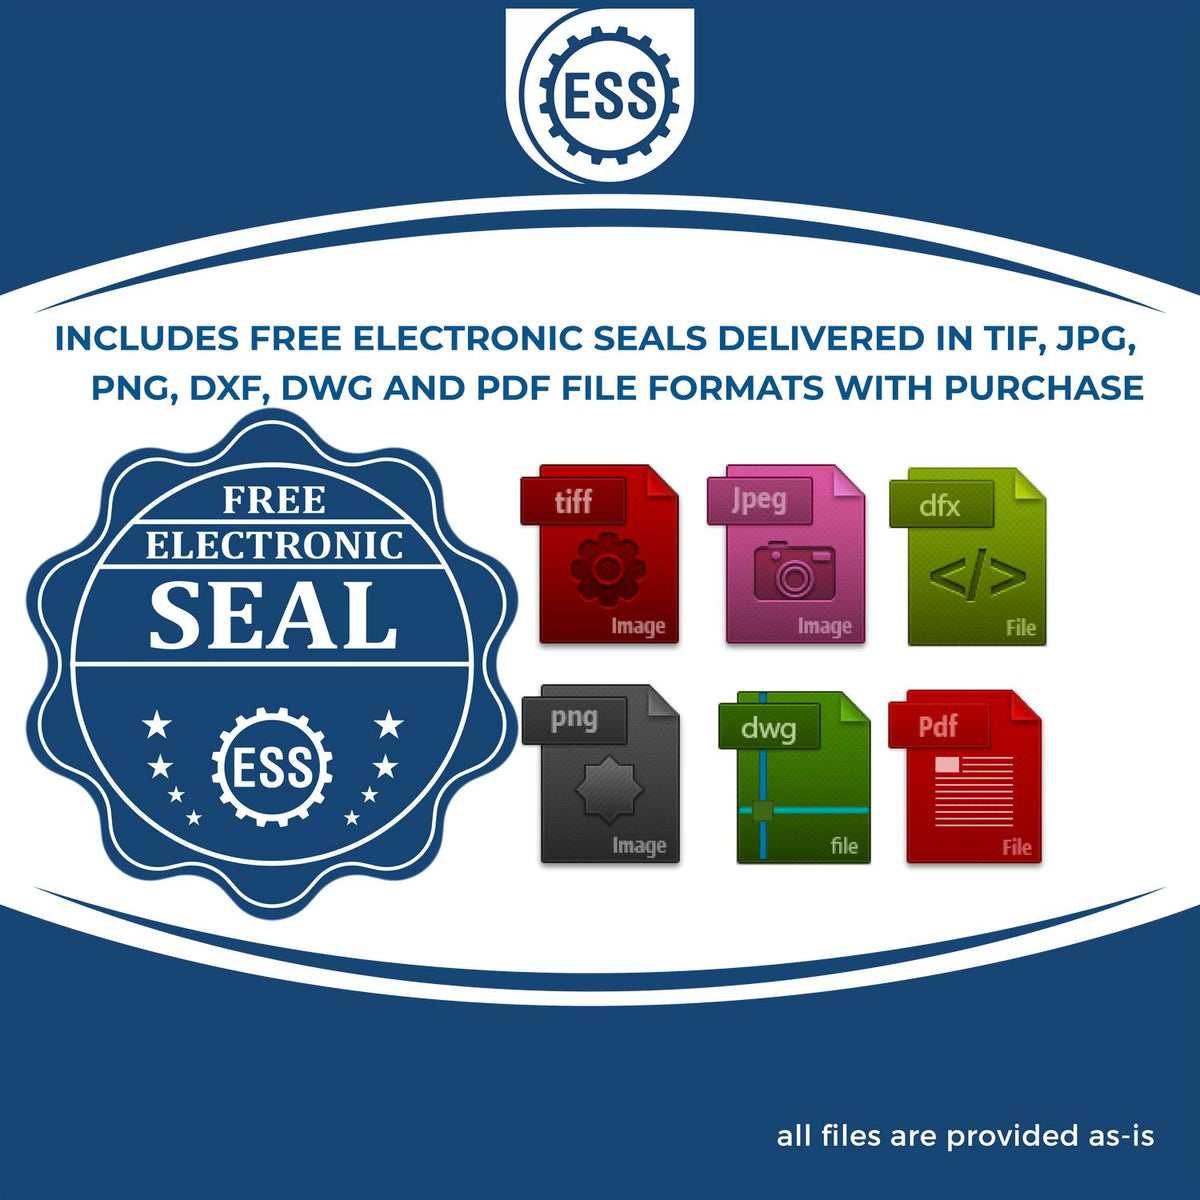 An infographic for the free electronic seal for the Kentucky Desk Architect Embossing Seal illustrating the different file type icons such as DXF, DWG, TIF, JPG and PNG.